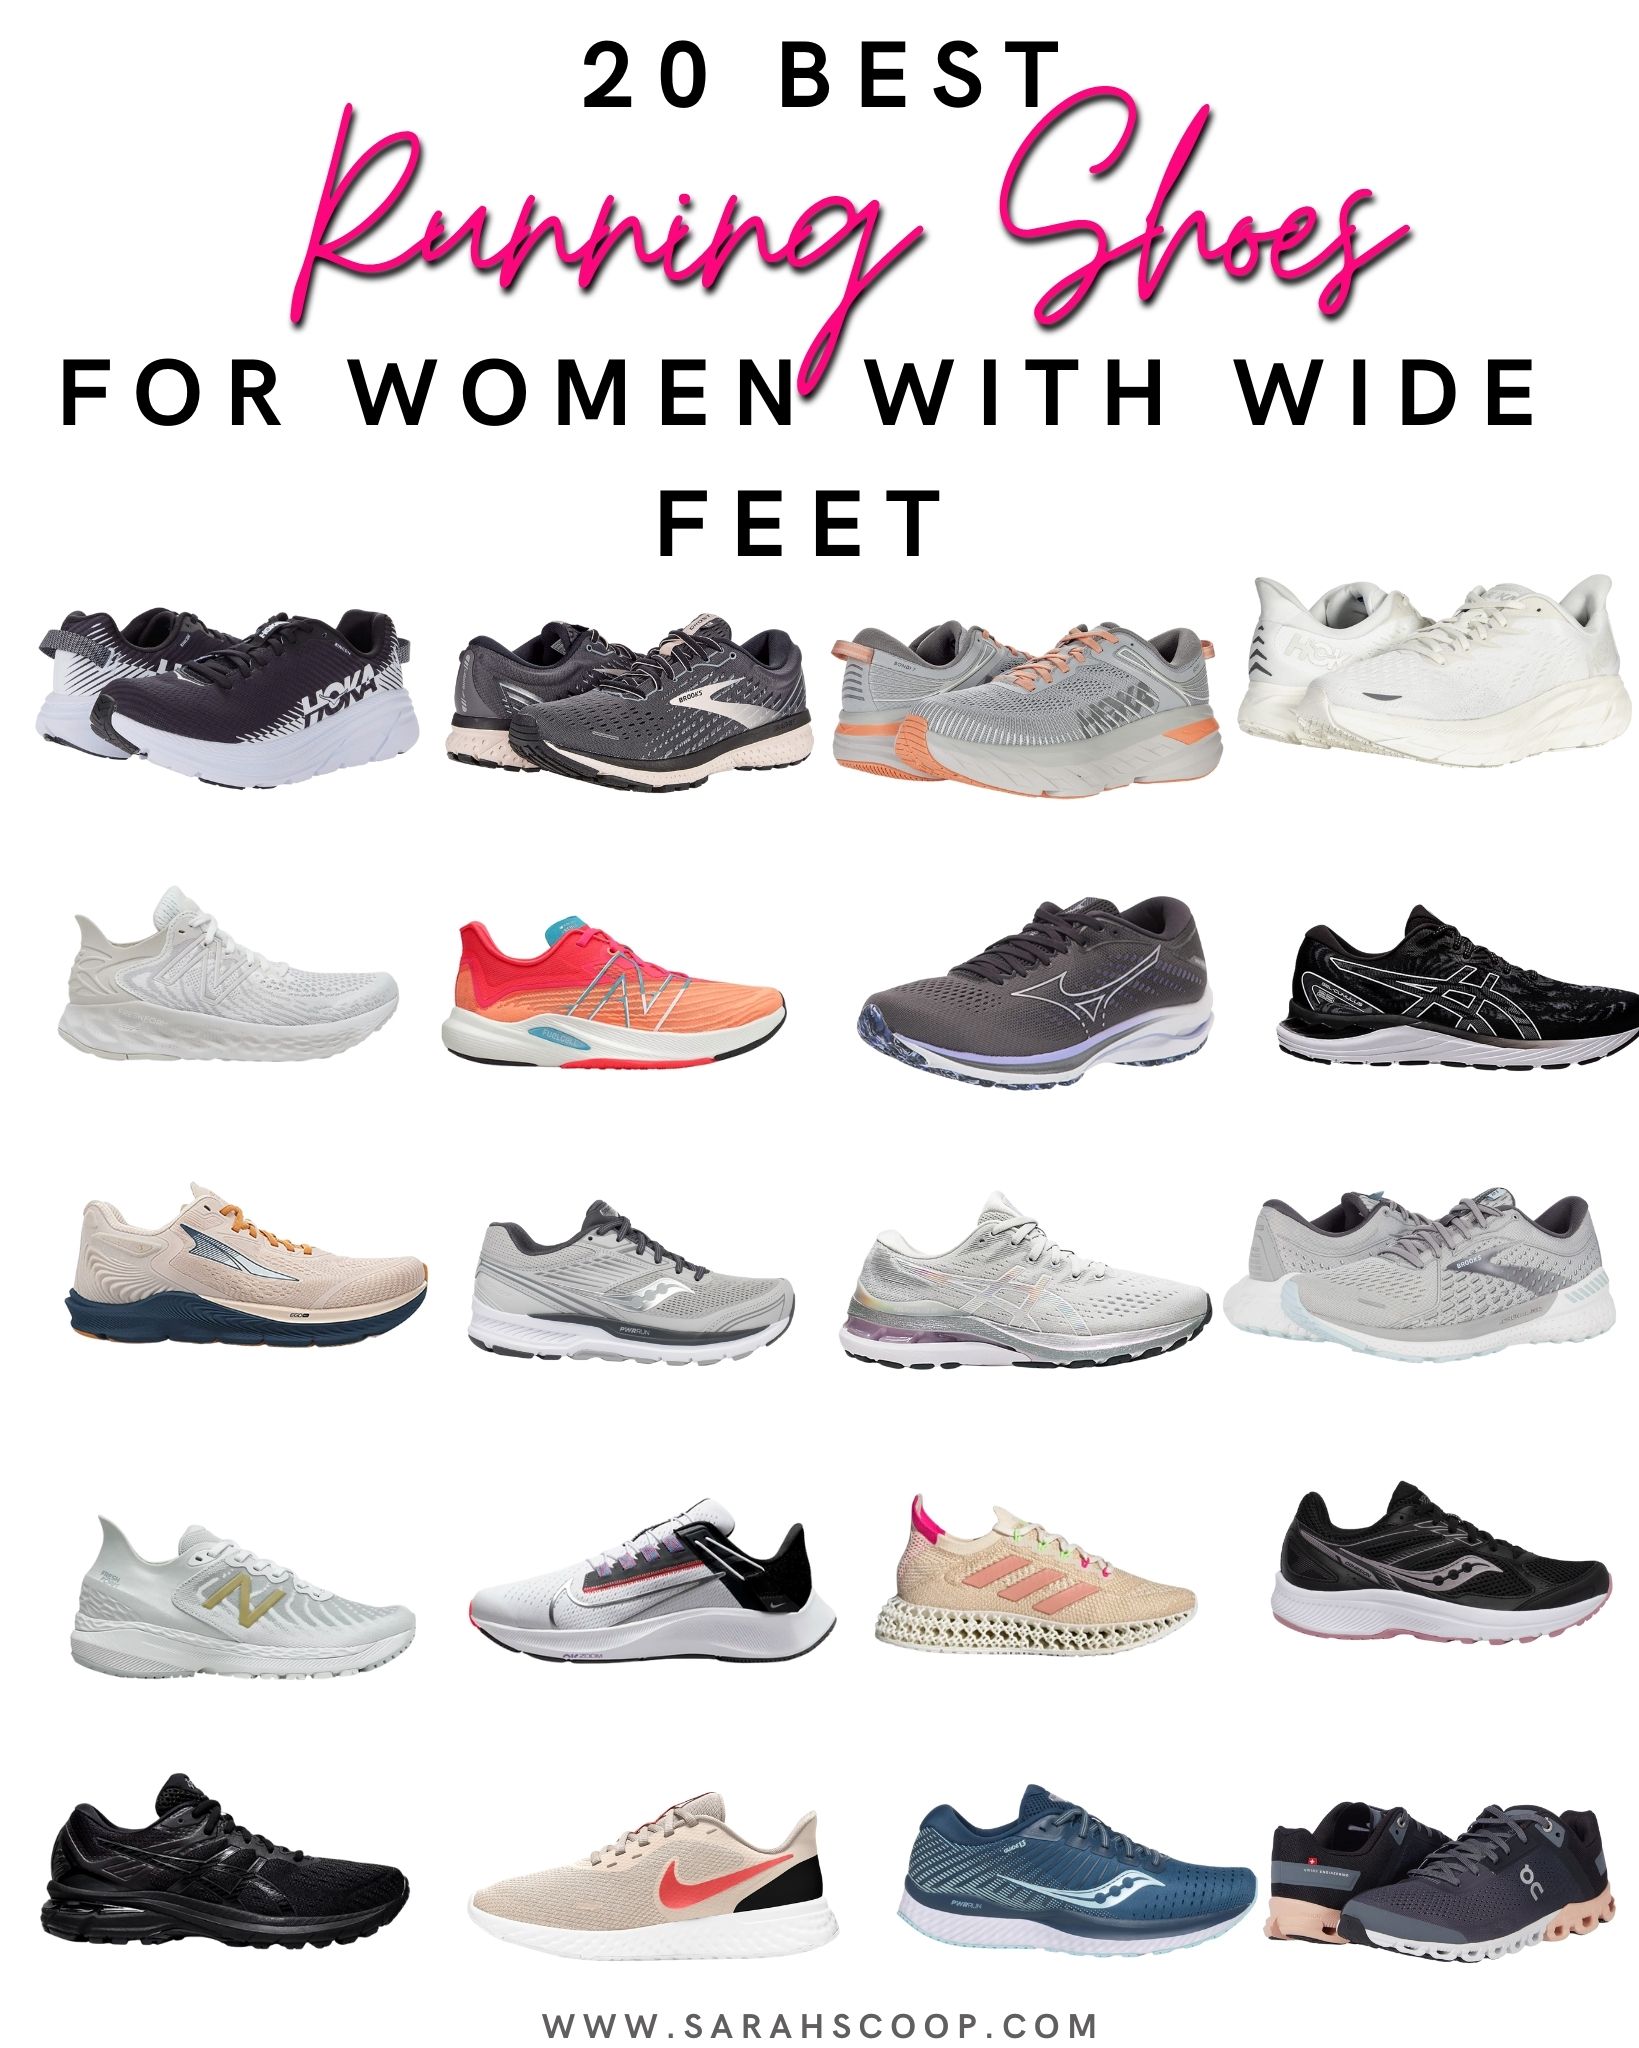 women's running shoes for high arches and wide feet